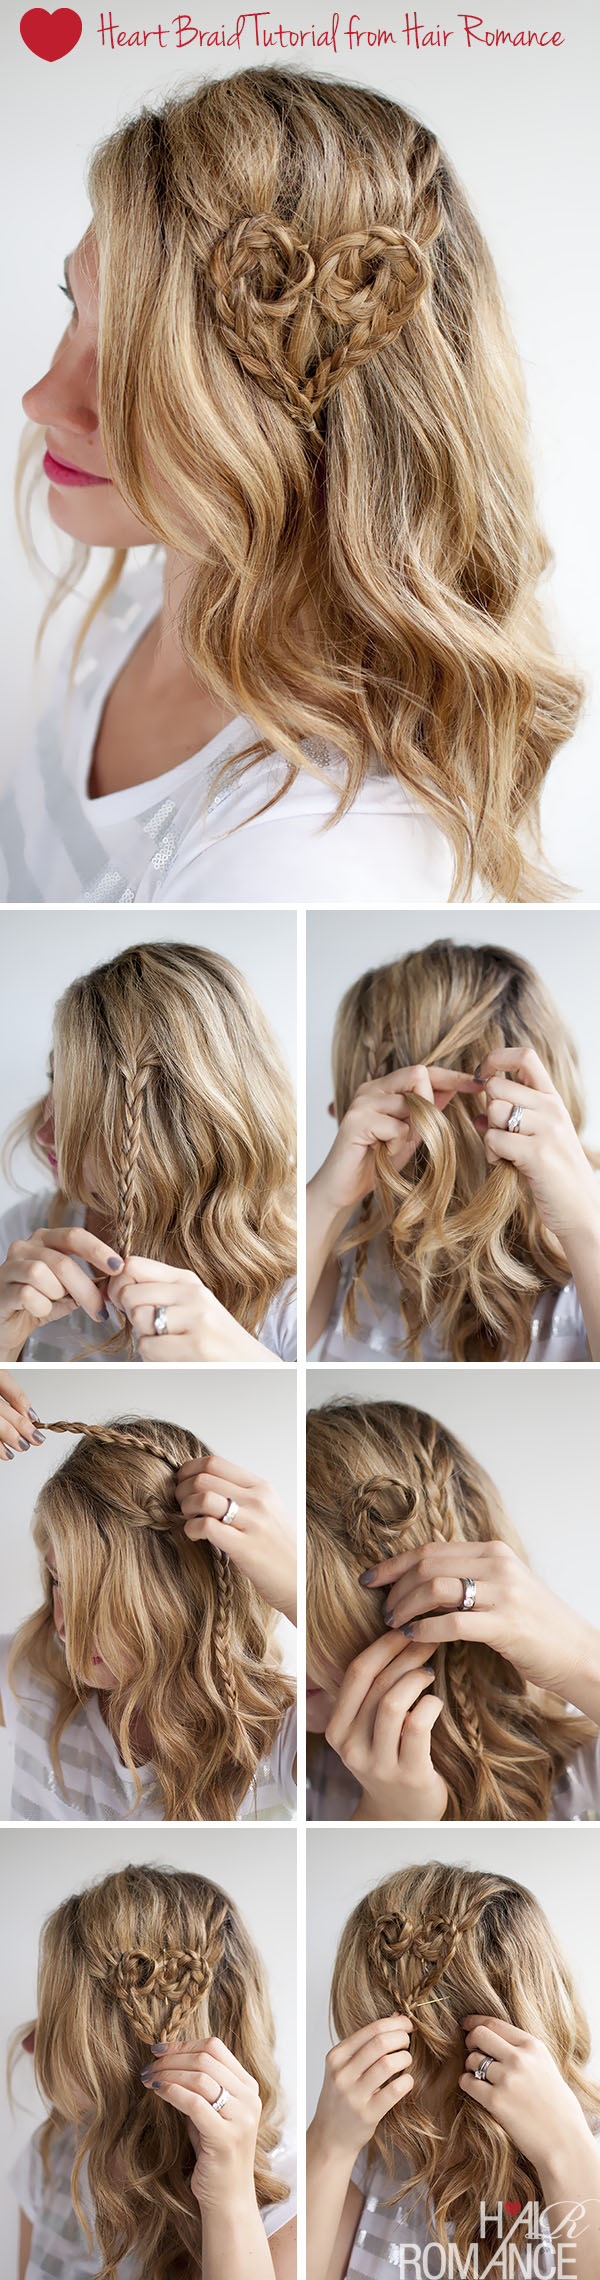 Easy-To-Make Valentine's Day Hairstyles You Will Fall In Love With